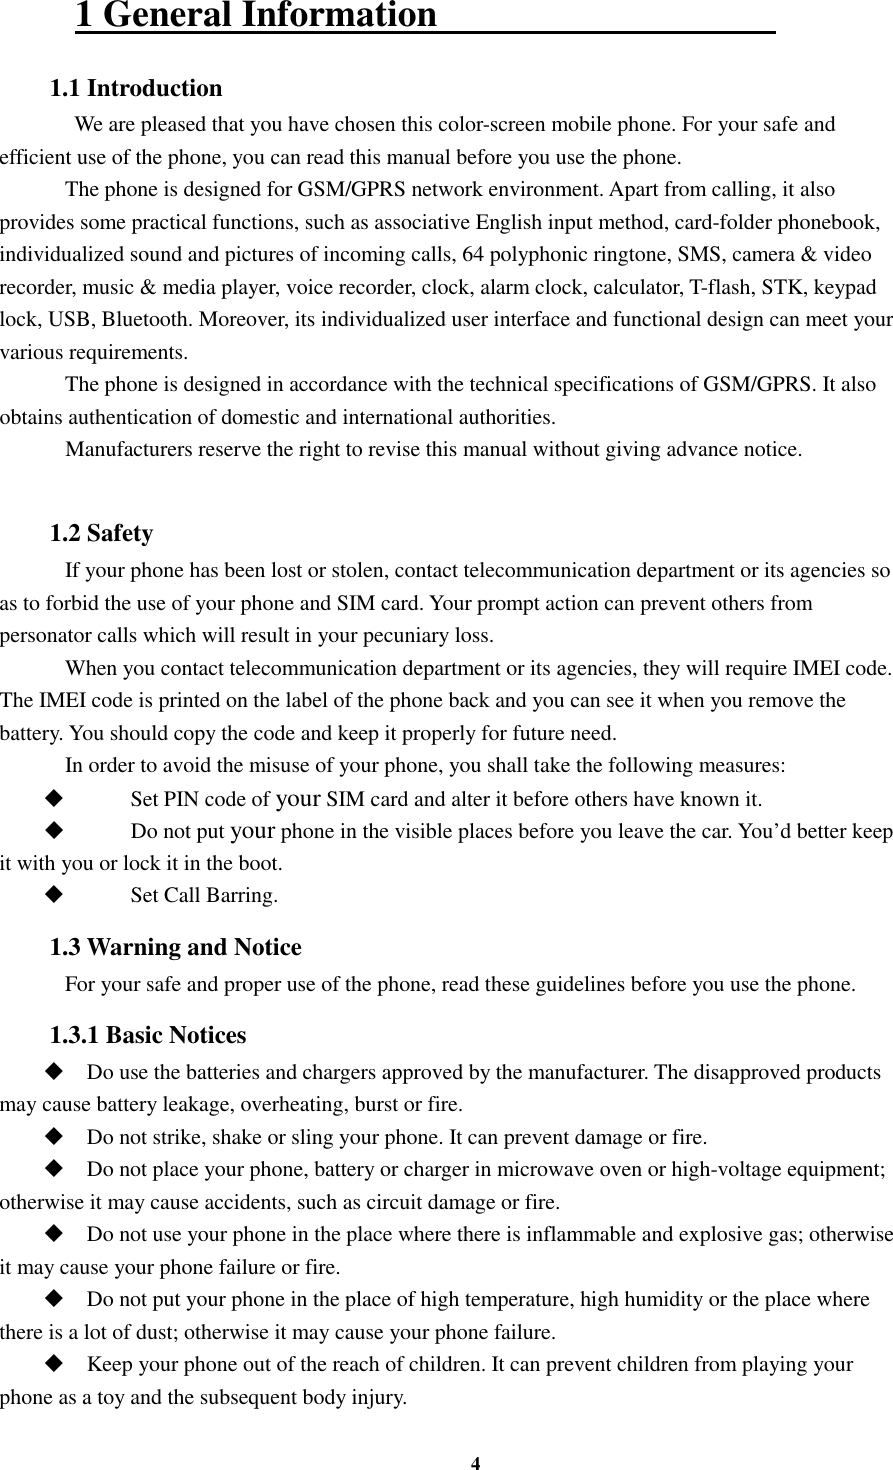 4 1 General Information                                     1.1 Introduction    We are pleased that you have chosen this color-screen mobile phone. For your safe and efficient use of the phone, you can read this manual before you use the phone.     The phone is designed for GSM/GPRS network environment. Apart from calling, it also provides some practical functions, such as associative English input method, card-folder phonebook, individualized sound and pictures of incoming calls, 64 polyphonic ringtone, SMS, camera &amp; video recorder, music &amp; media player, voice recorder, clock, alarm clock, calculator, T-flash, STK, keypad lock, USB, Bluetooth. Moreover, its individualized user interface and functional design can meet your various requirements.     The phone is designed in accordance with the technical specifications of GSM/GPRS. It also obtains authentication of domestic and international authorities.     Manufacturers reserve the right to revise this manual without giving advance notice.  1.2 Safety     If your phone has been lost or stolen, contact telecommunication department or its agencies so as to forbid the use of your phone and SIM card. Your prompt action can prevent others from personator calls which will result in your pecuniary loss.     When you contact telecommunication department or its agencies, they will require IMEI code. The IMEI code is printed on the label of the phone back and you can see it when you remove the battery. You should copy the code and keep it properly for future need.     In order to avoid the misuse of your phone, you shall take the following measures:  Set PIN code of your SIM card and alter it before others have known it.  Do not put your phone in the visible places before you leave the car. You’d better keep it with you or lock it in the boot.  Set Call Barring. 1.3 Warning and Notice     For your safe and proper use of the phone, read these guidelines before you use the phone. 1.3.1 Basic Notices  Do use the batteries and chargers approved by the manufacturer. The disapproved products may cause battery leakage, overheating, burst or fire.  Do not strike, shake or sling your phone. It can prevent damage or fire.  Do not place your phone, battery or charger in microwave oven or high-voltage equipment; otherwise it may cause accidents, such as circuit damage or fire.  Do not use your phone in the place where there is inflammable and explosive gas; otherwise it may cause your phone failure or fire.  Do not put your phone in the place of high temperature, high humidity or the place where there is a lot of dust; otherwise it may cause your phone failure.  Keep your phone out of the reach of children. It can prevent children from playing your phone as a toy and the subsequent body injury. 